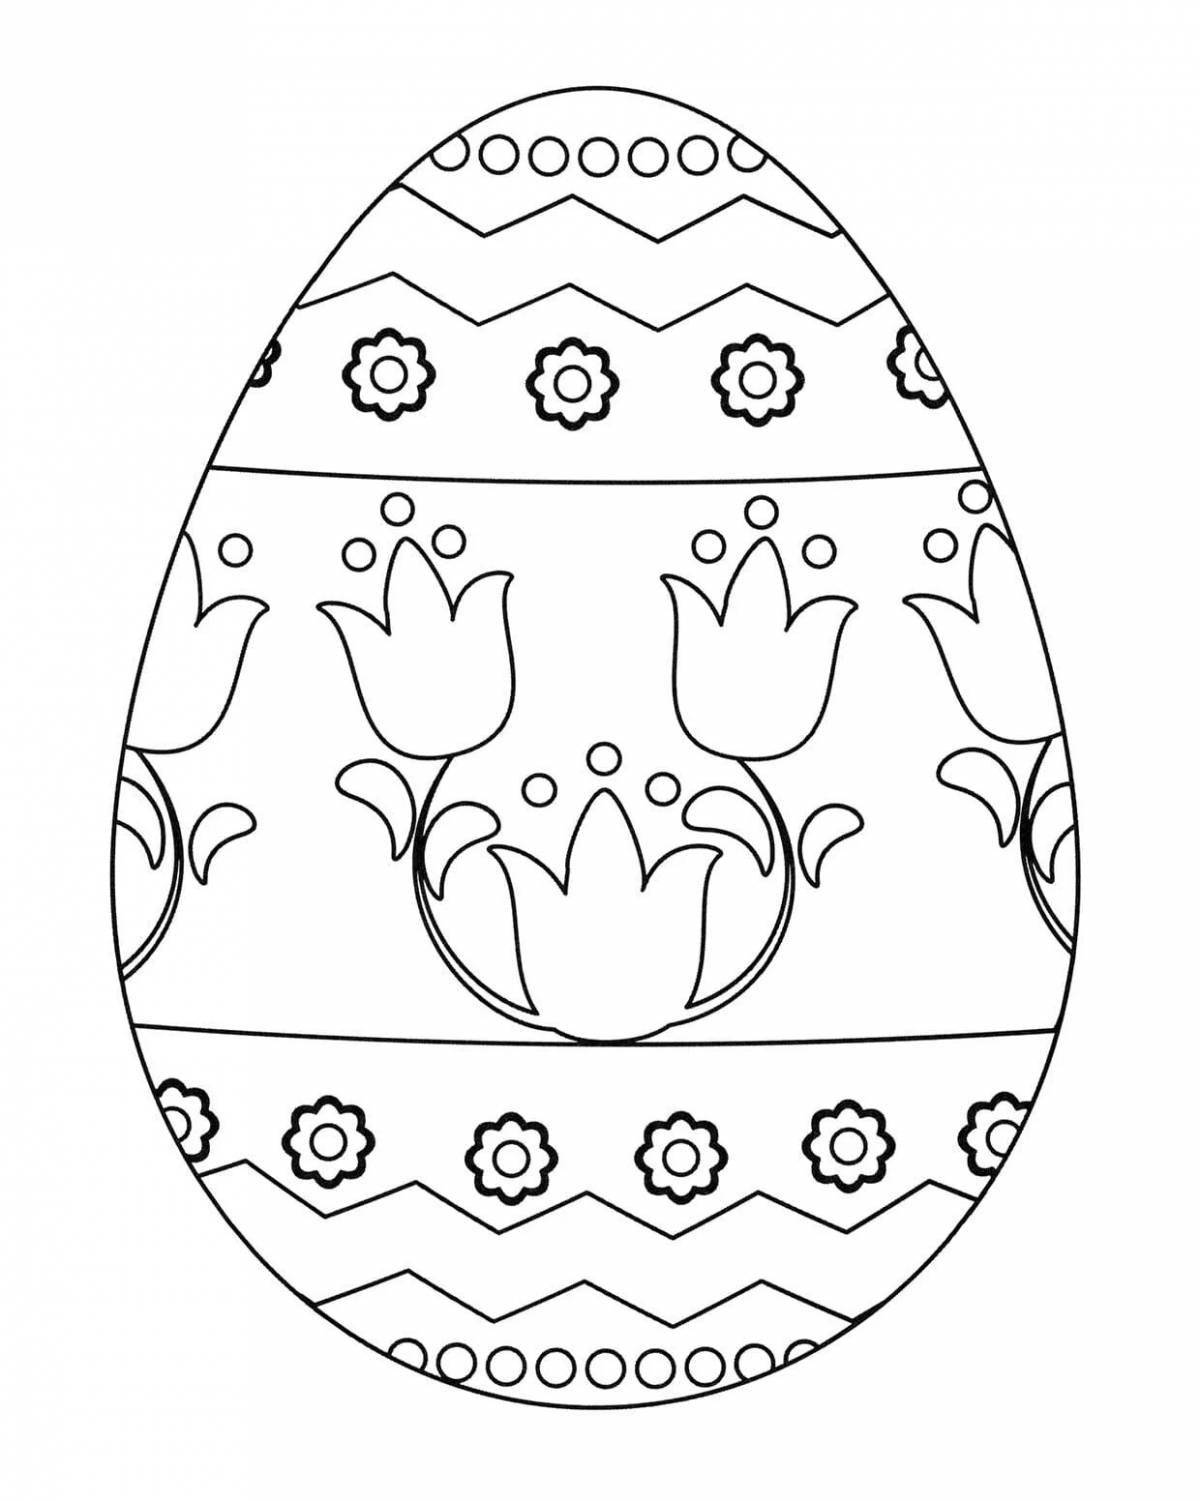 Lovely testicles coloring page